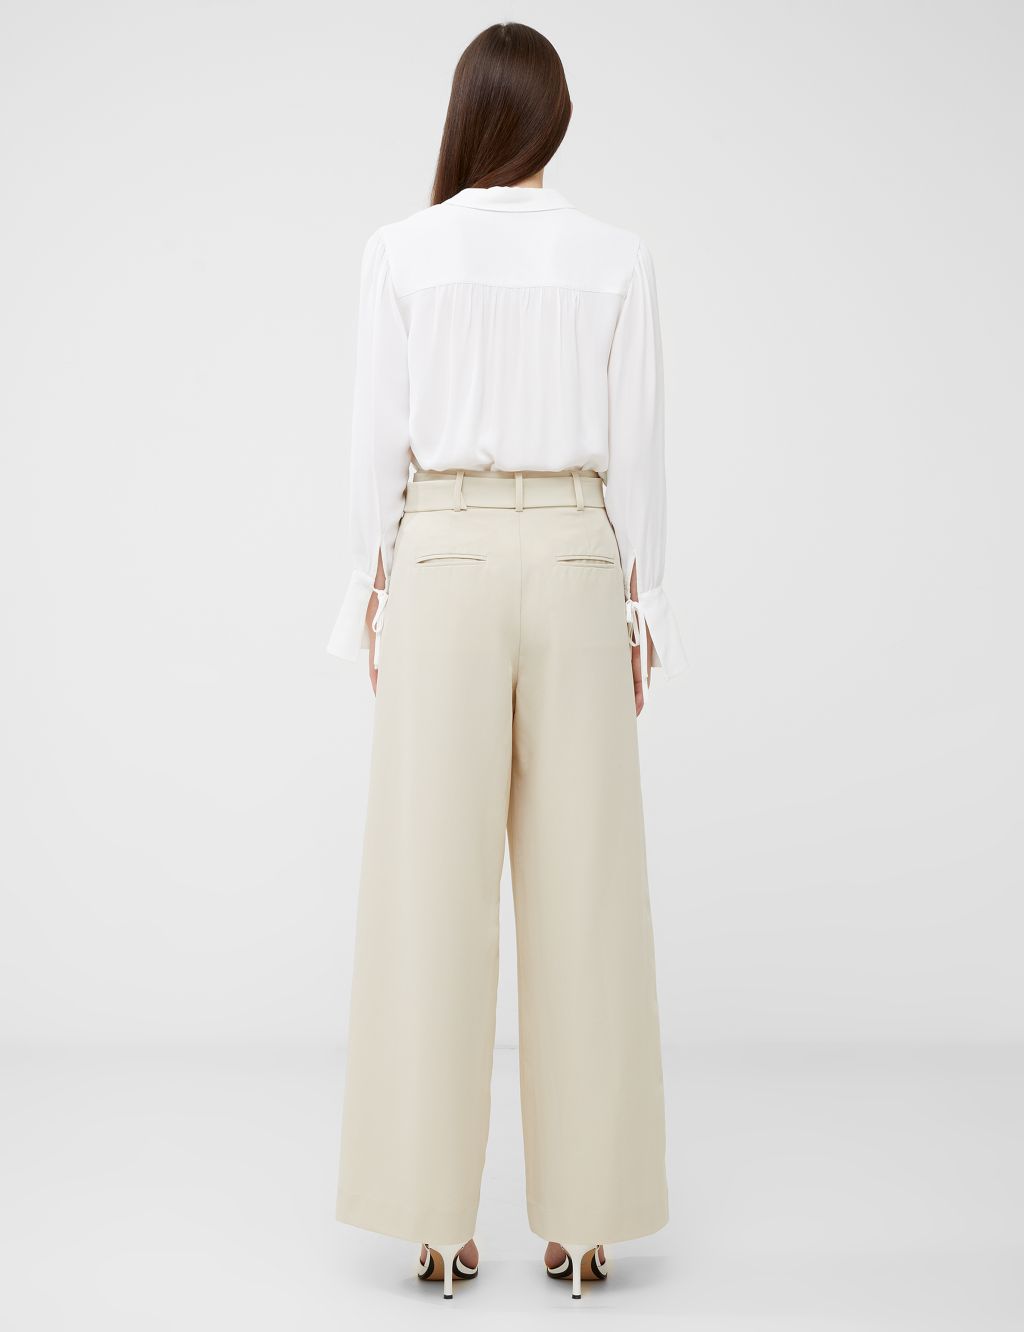 Belted Wide Leg Trousers image 4